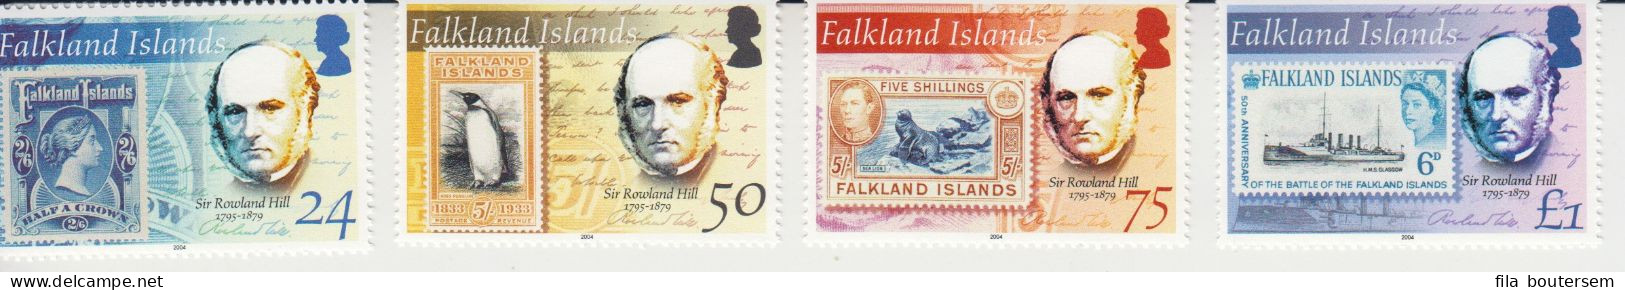 Falkland Islands 2004 125th Anniversary Of Death Of Rowland Hill Set Of 4, SG 989/92 - Rowland Hill